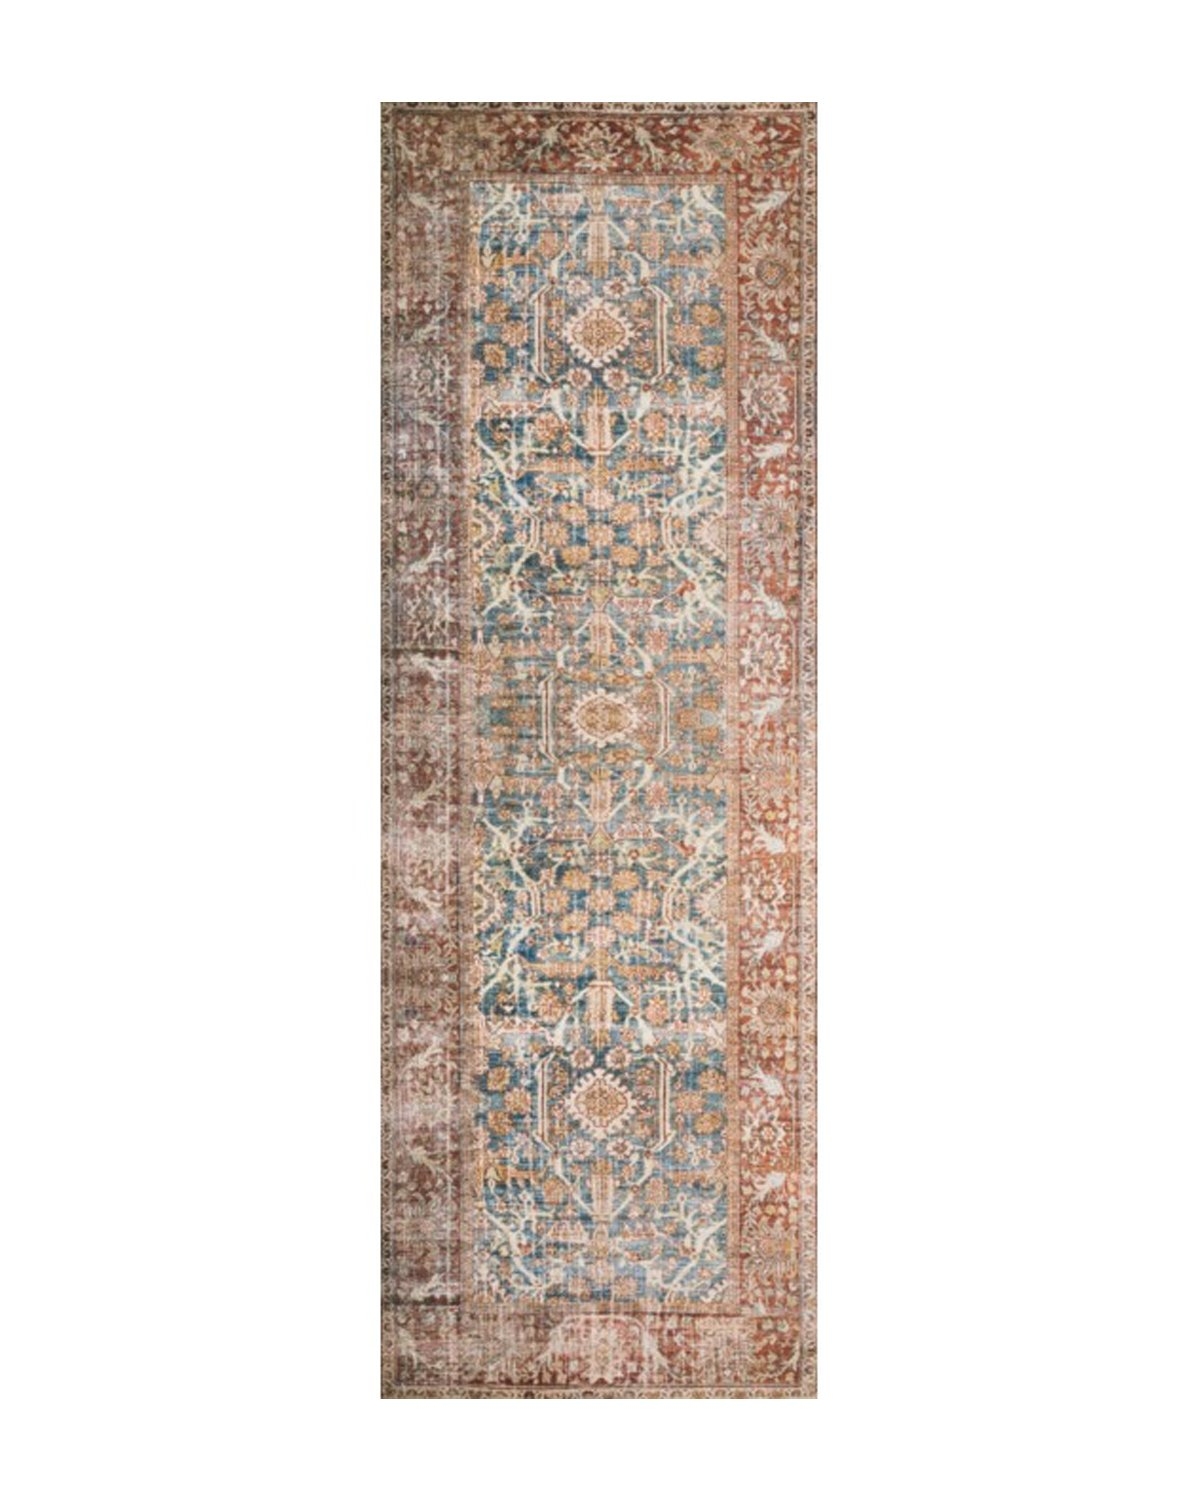 TUNIS PATTERNED RUG, 2'6" x 12' - Image 0